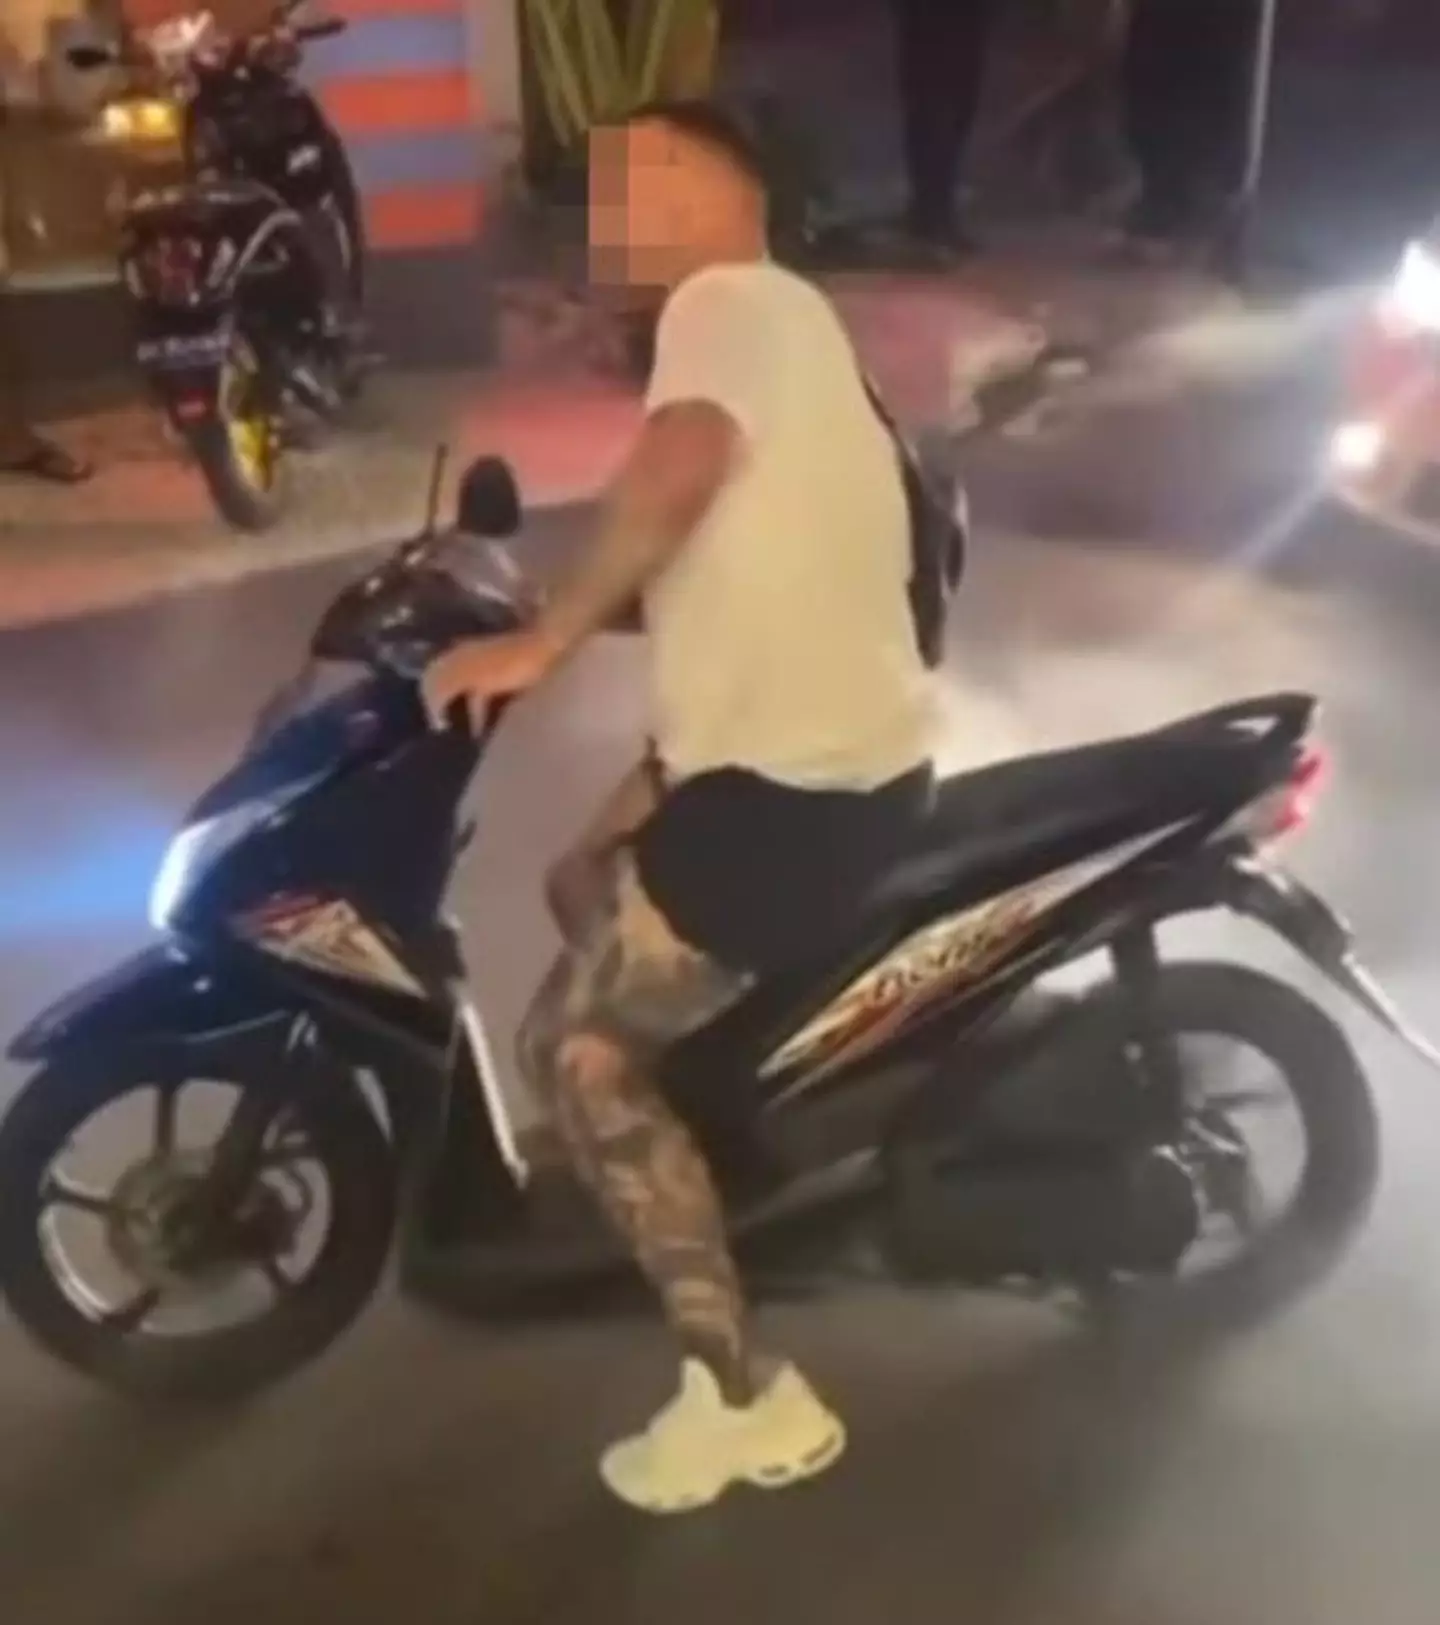 An Australian man was labelled ‘disrespectful’ after he did burnouts in the middle of the street in Bali.